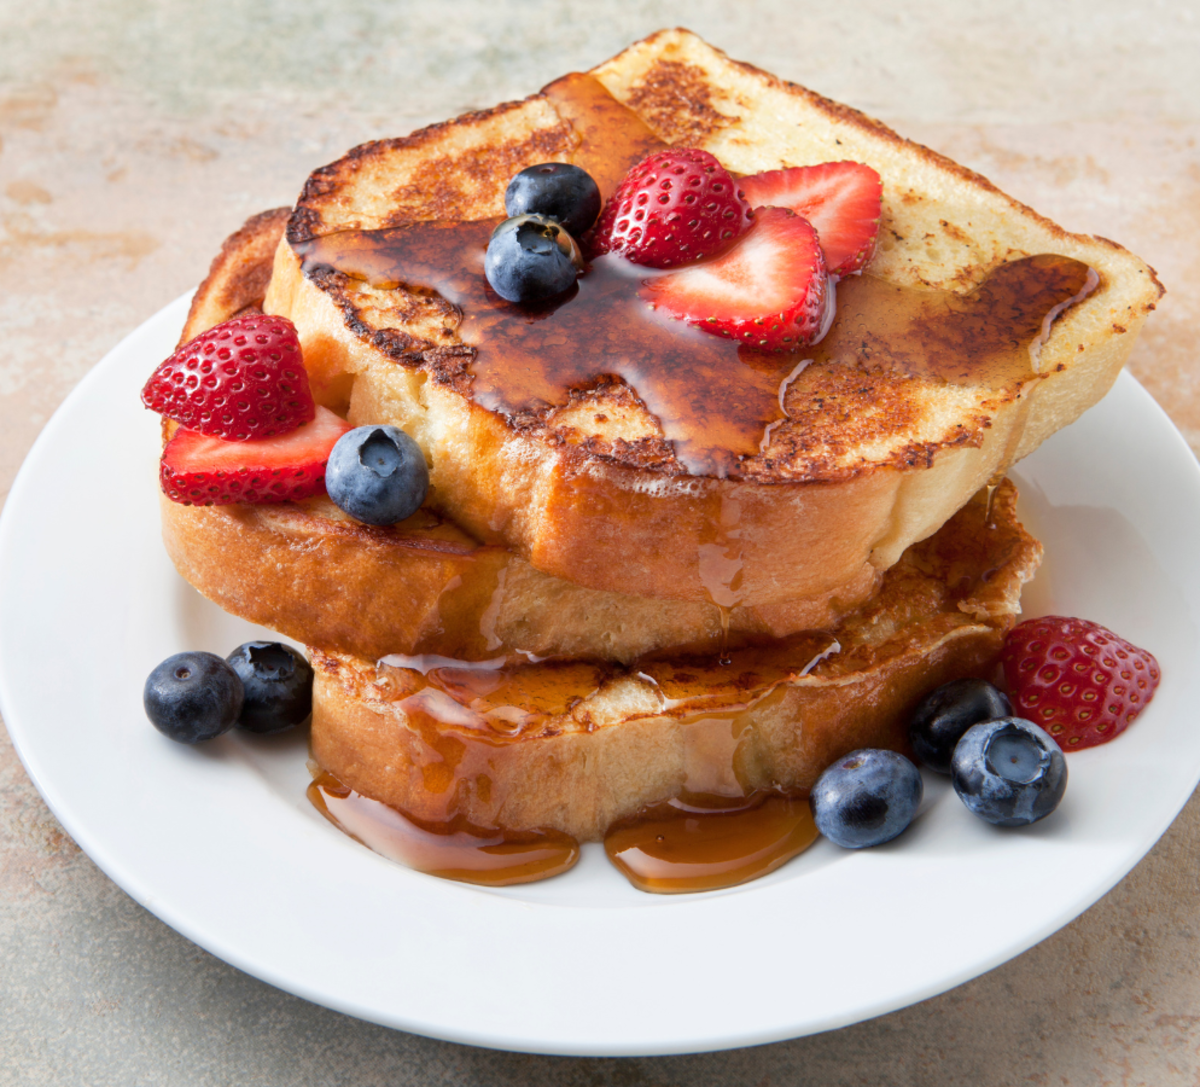 Easy French Toast with Berries Recipe